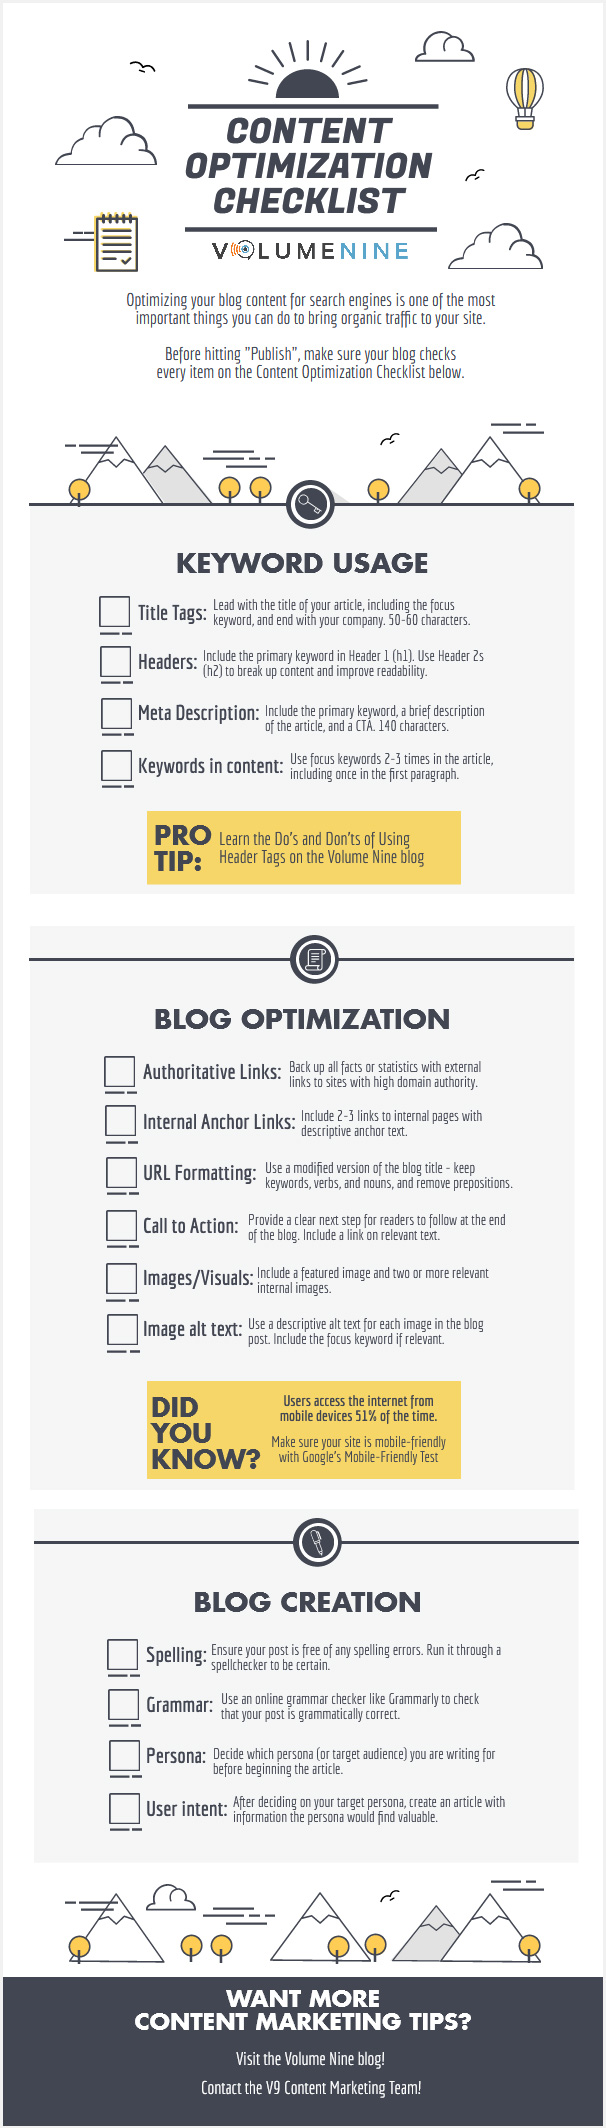 How to Optimize Content: The Essential Checklist